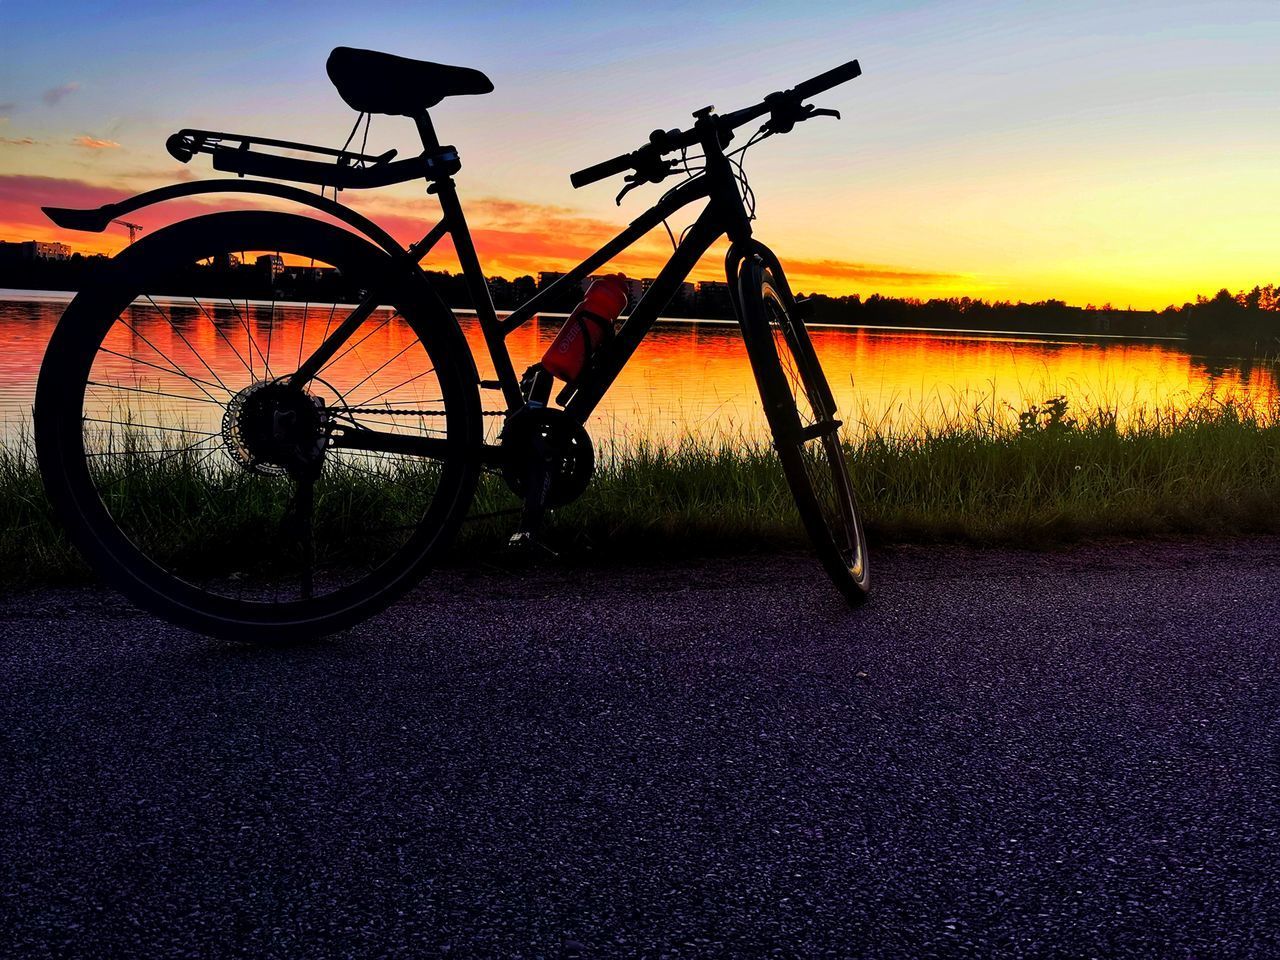 BICYCLE PARKED ON ROAD AGAINST SKY DURING SUNSET